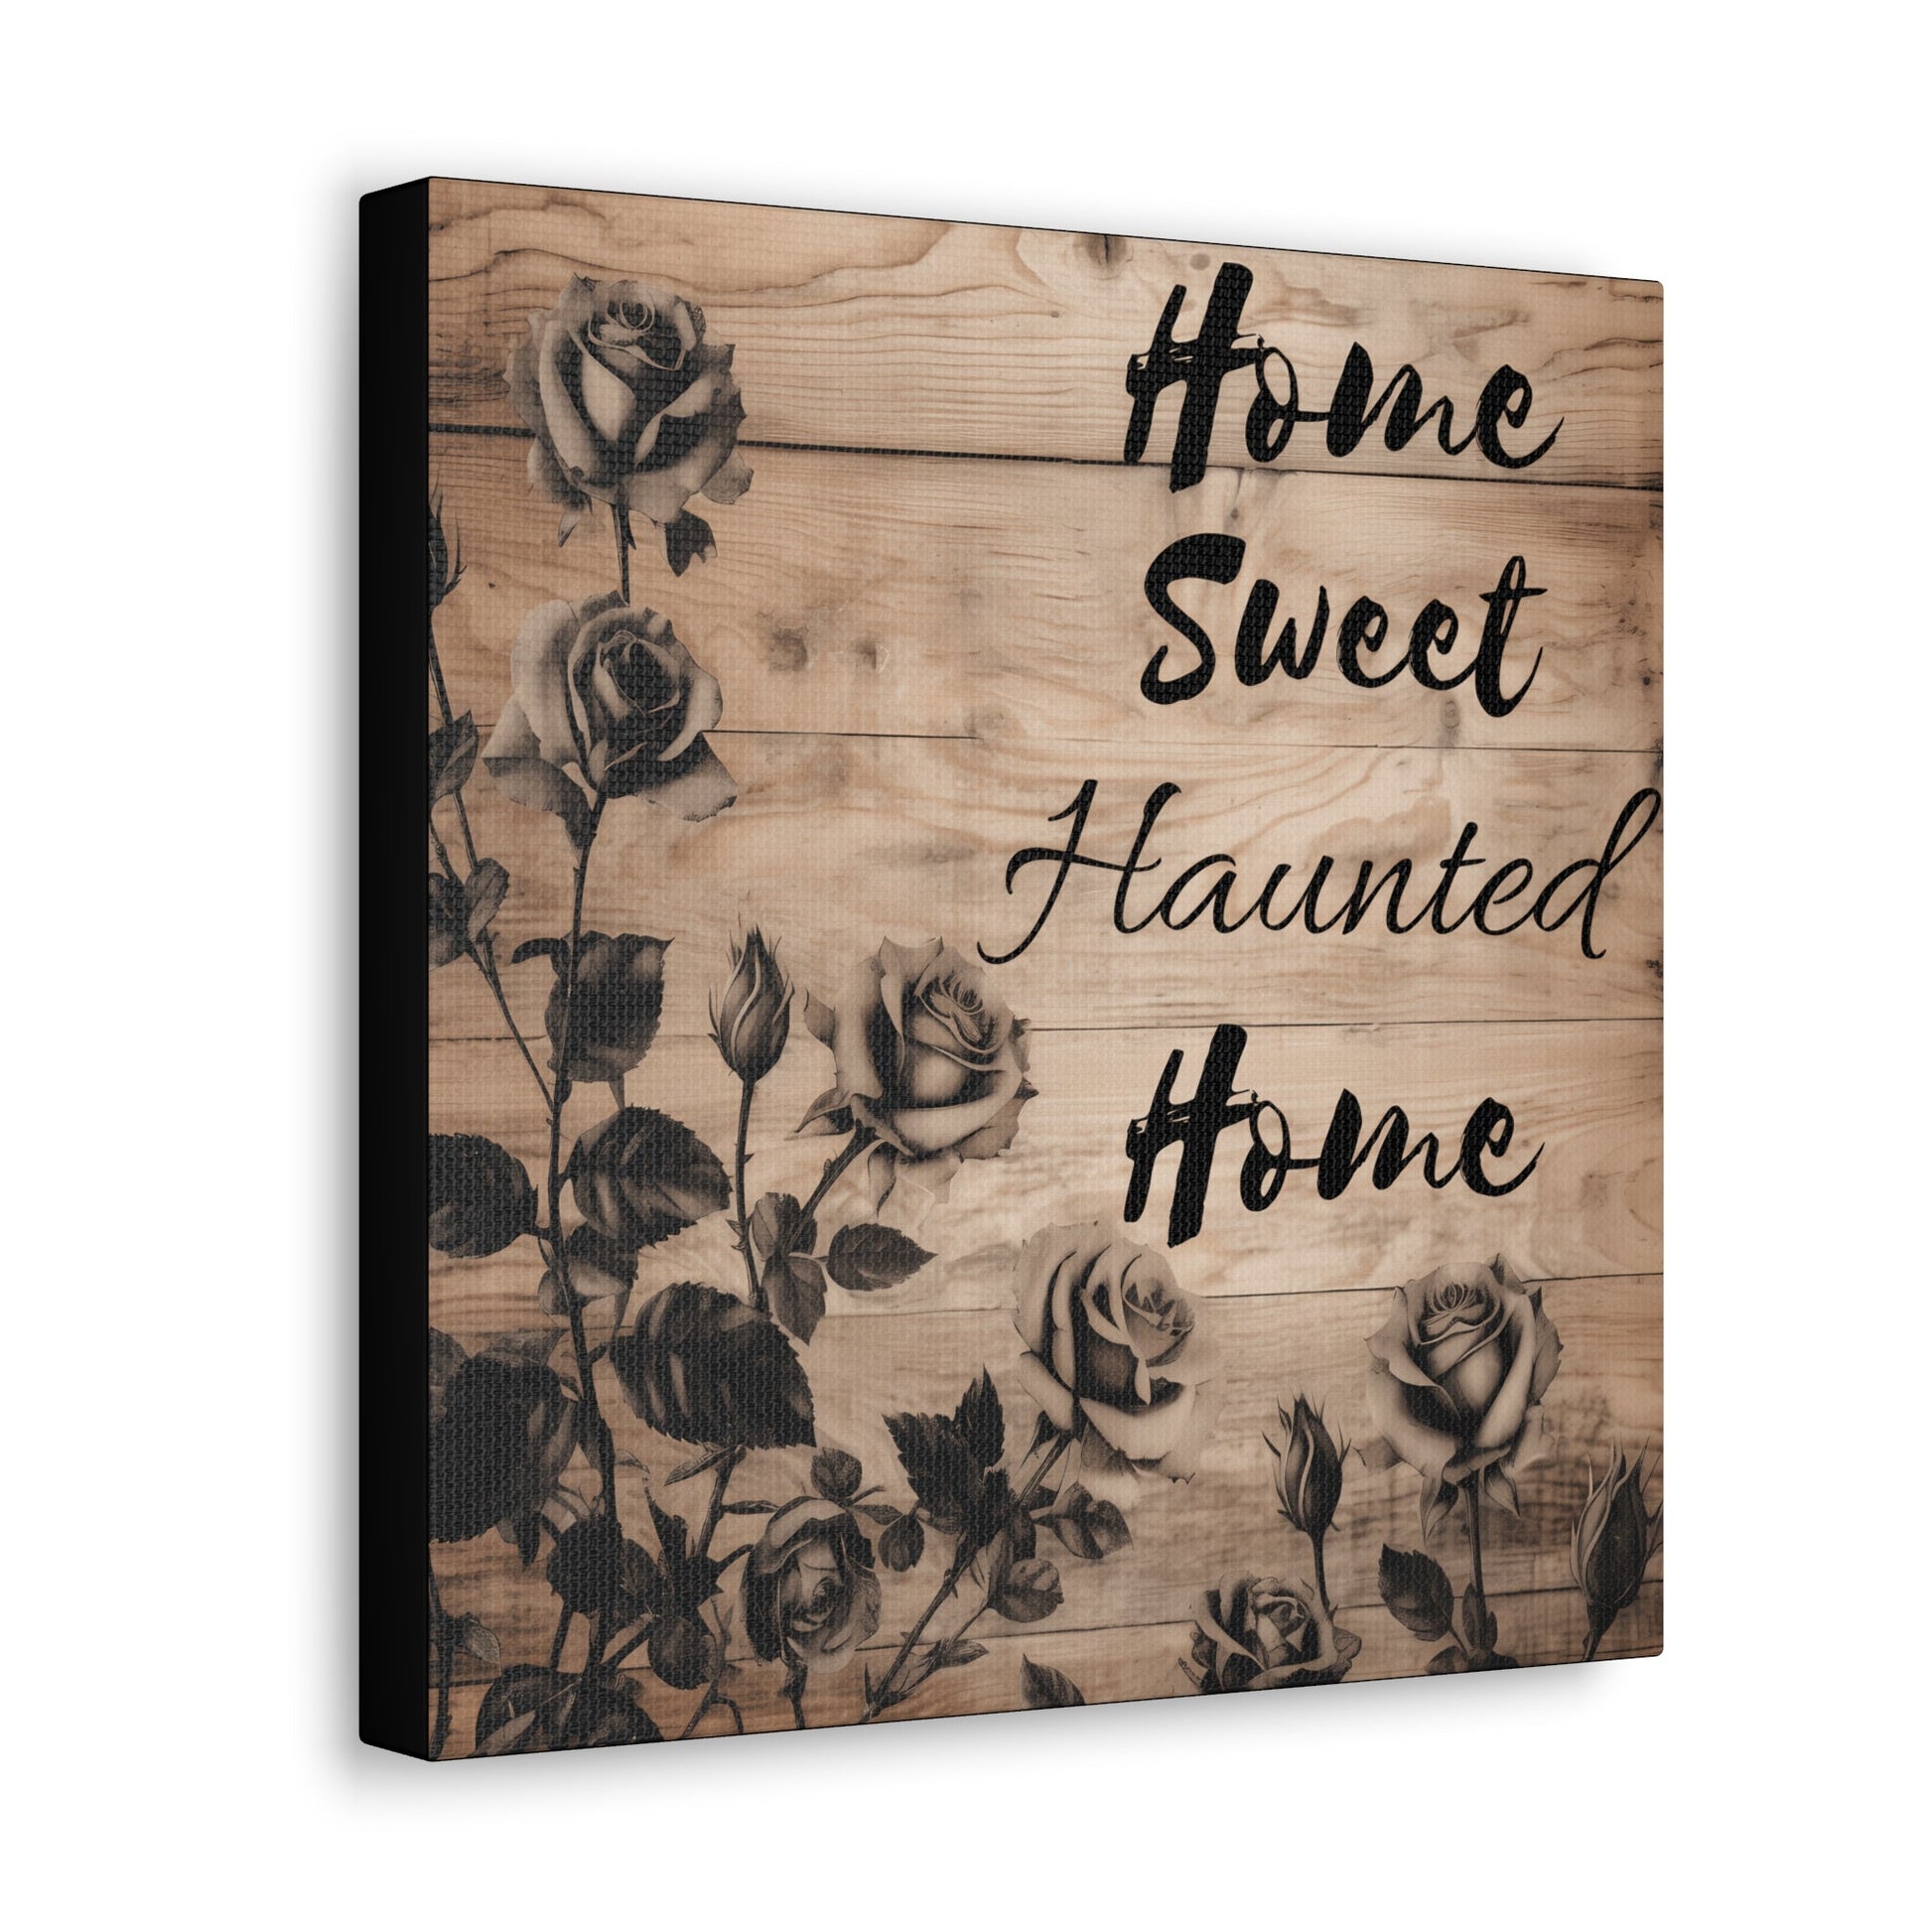 Home Sweet Haunted Home Black Roses Canvas Gallery WrapCanvasVTZdesigns12″ x 12″1.25"Art & Wall DecorCanvasFall Picks